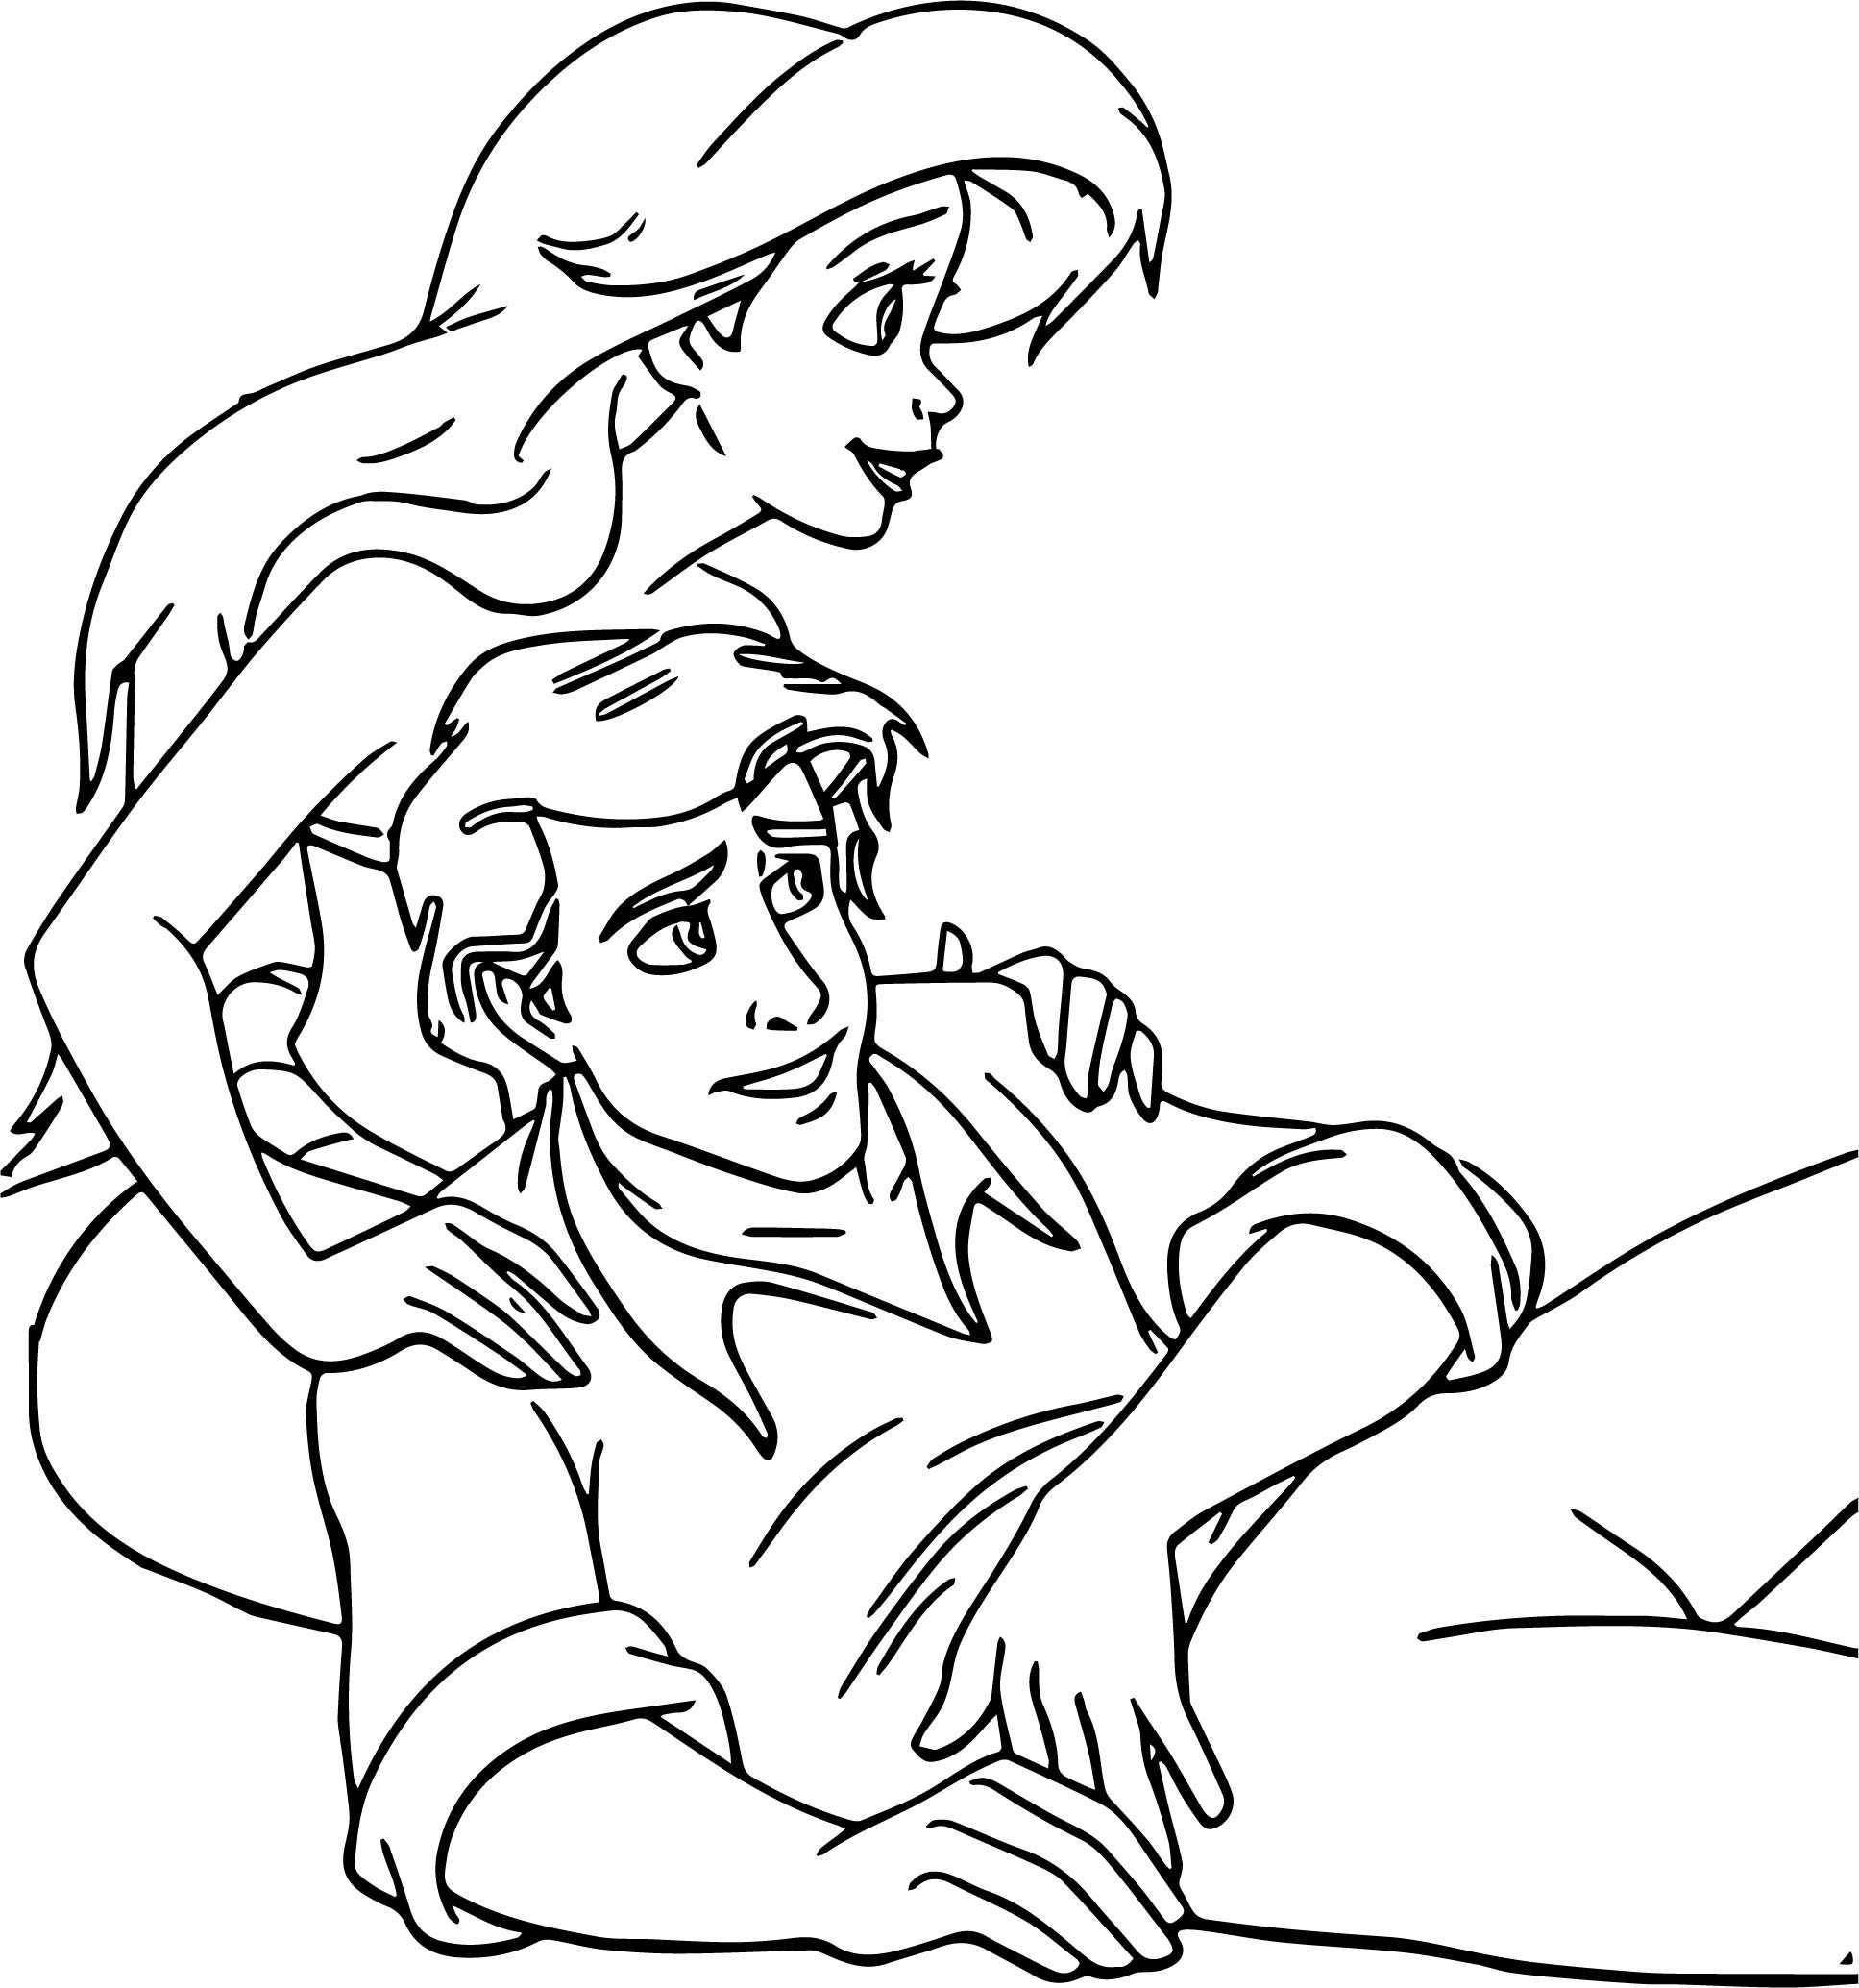 Boyfriend And Girlfriend Coloring Pages
 Disney The Little Mermaid Return To The Sea Boyfriend